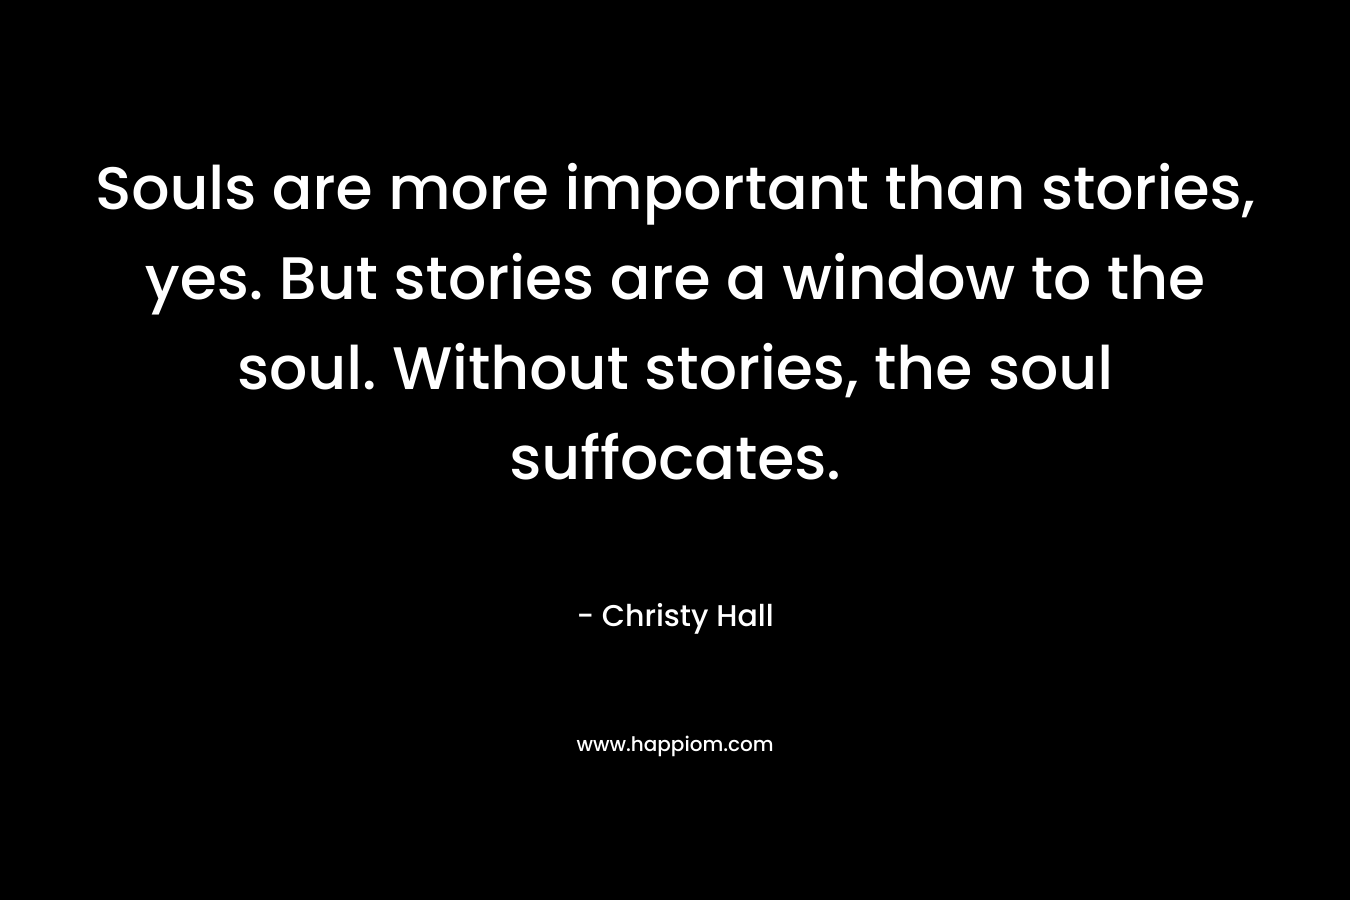 Souls are more important than stories, yes. But stories are a window to the soul. Without stories, the soul suffocates.